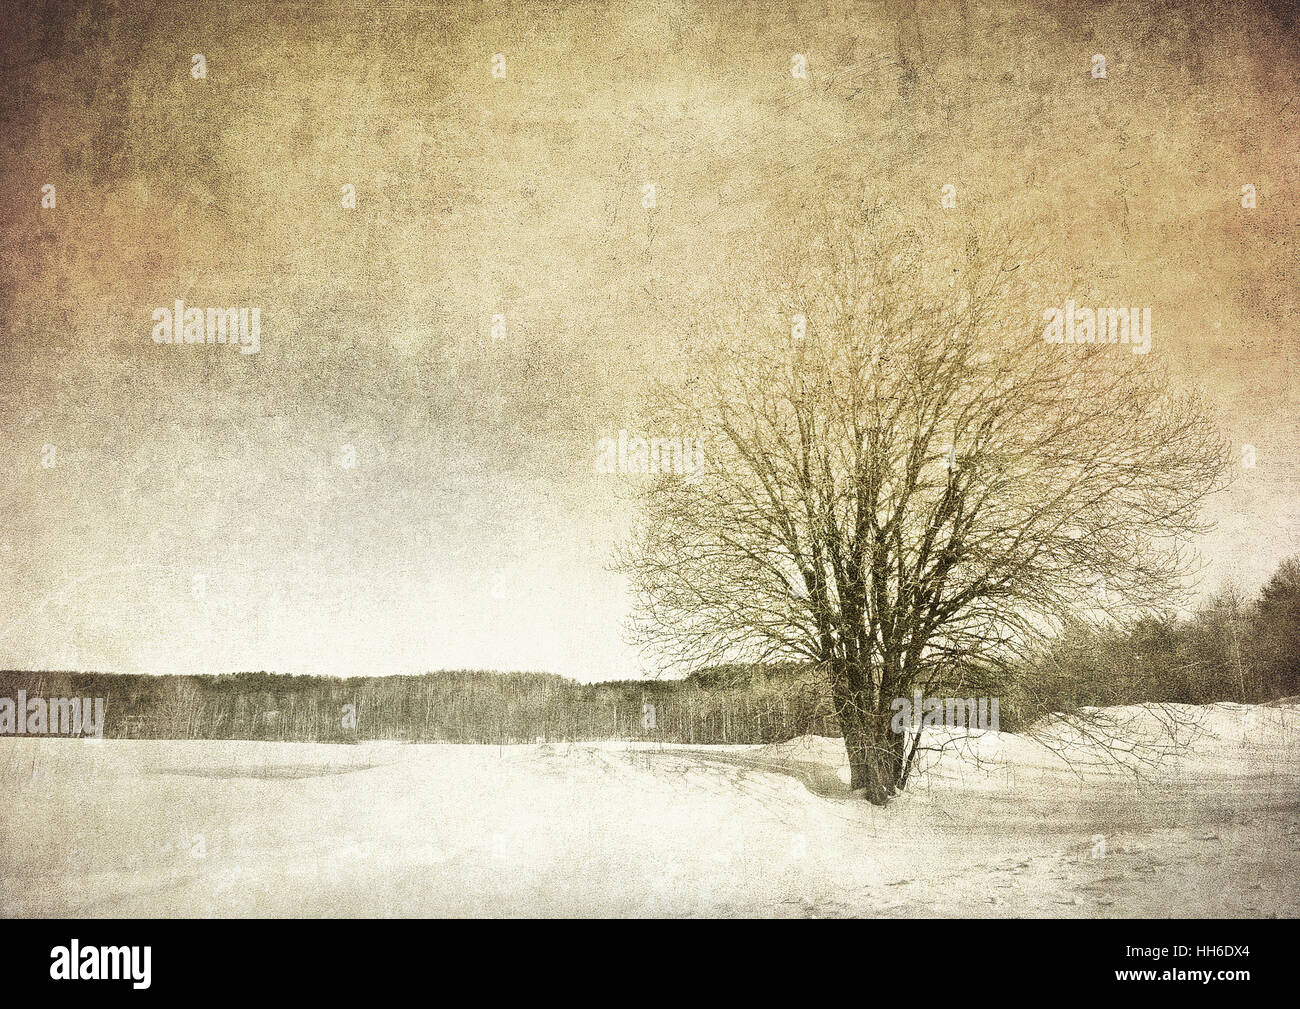 grunge image of a tree over vintage background Stock Photo